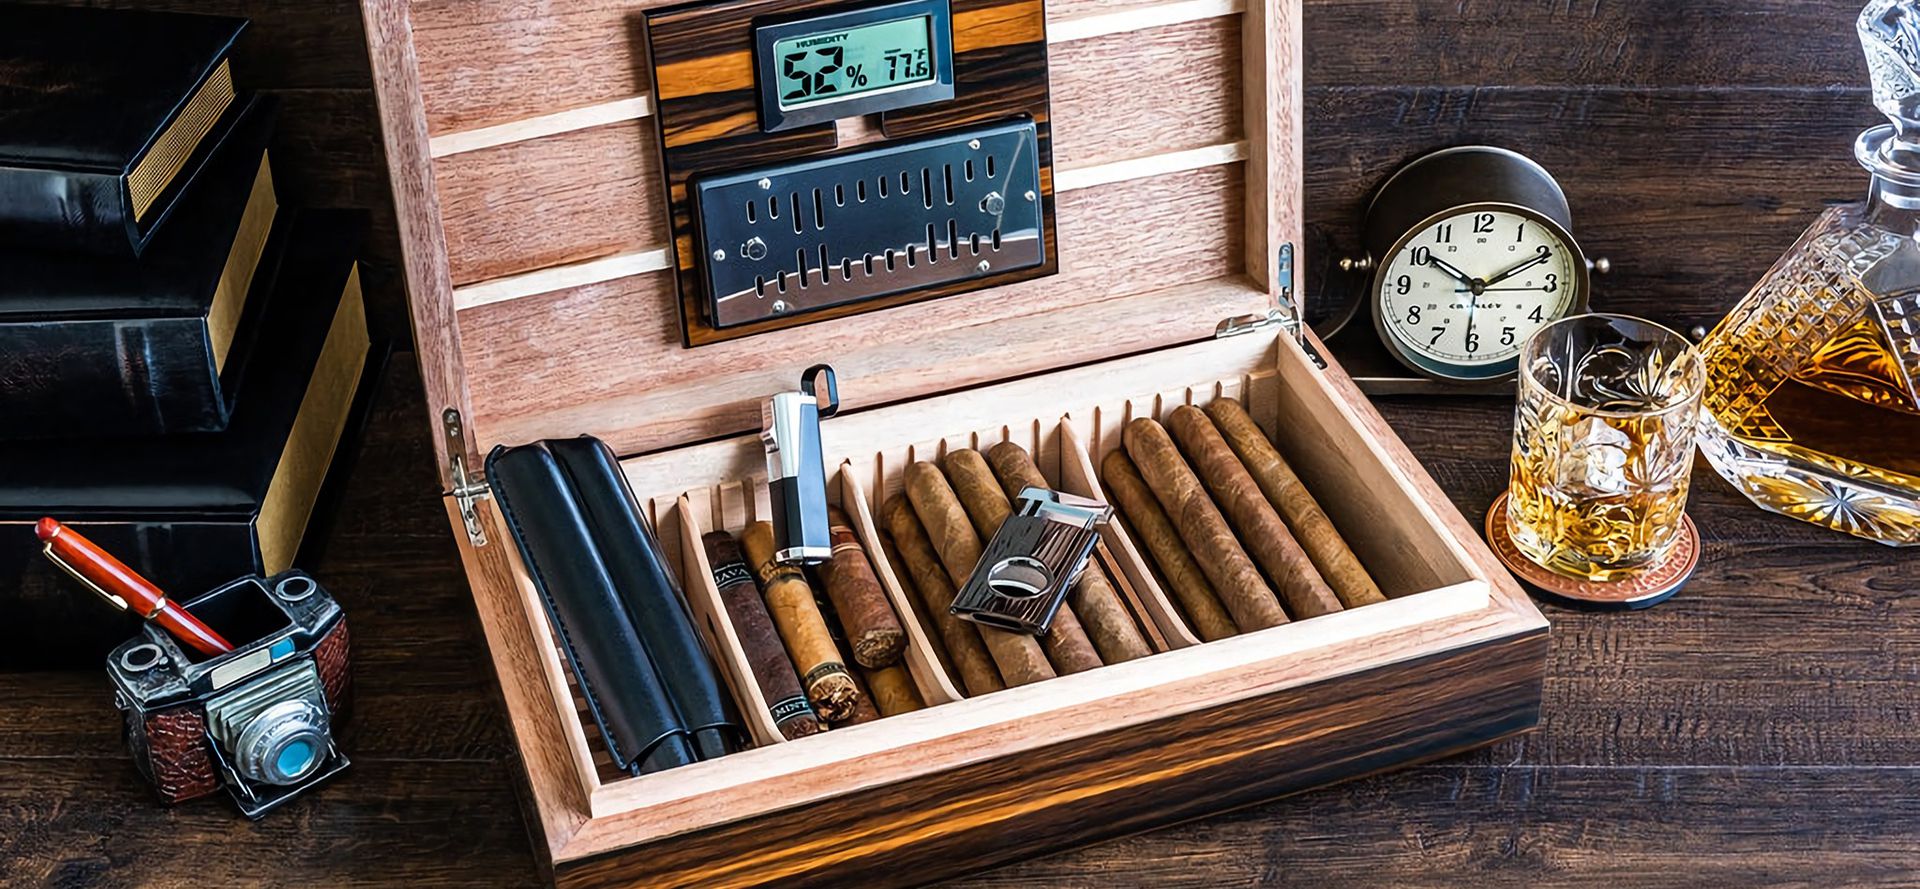 Cigars And Accessories In Humidor.